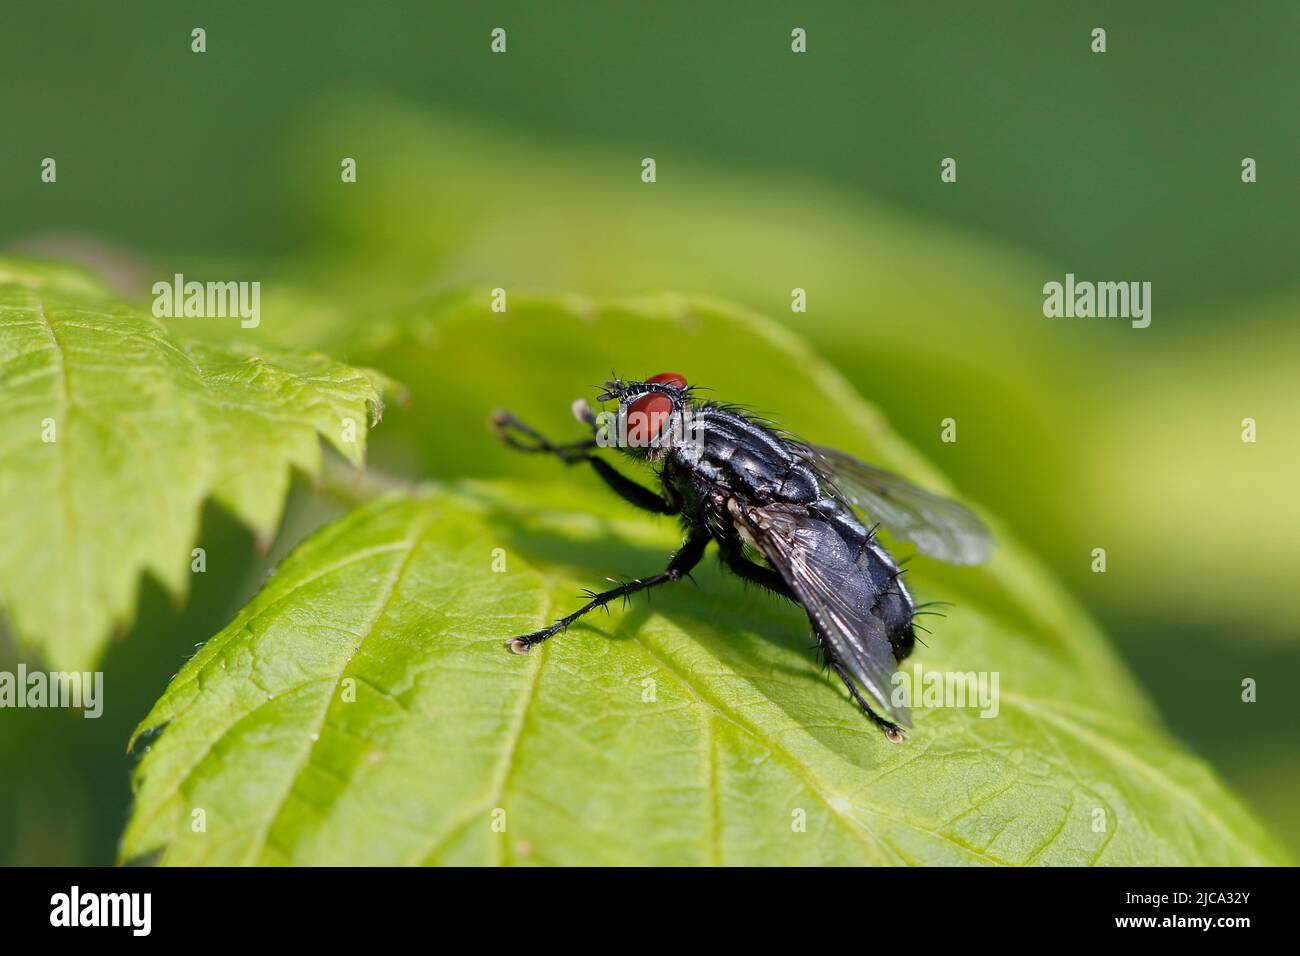 A blowfly sits on a tree leave Stock Photo